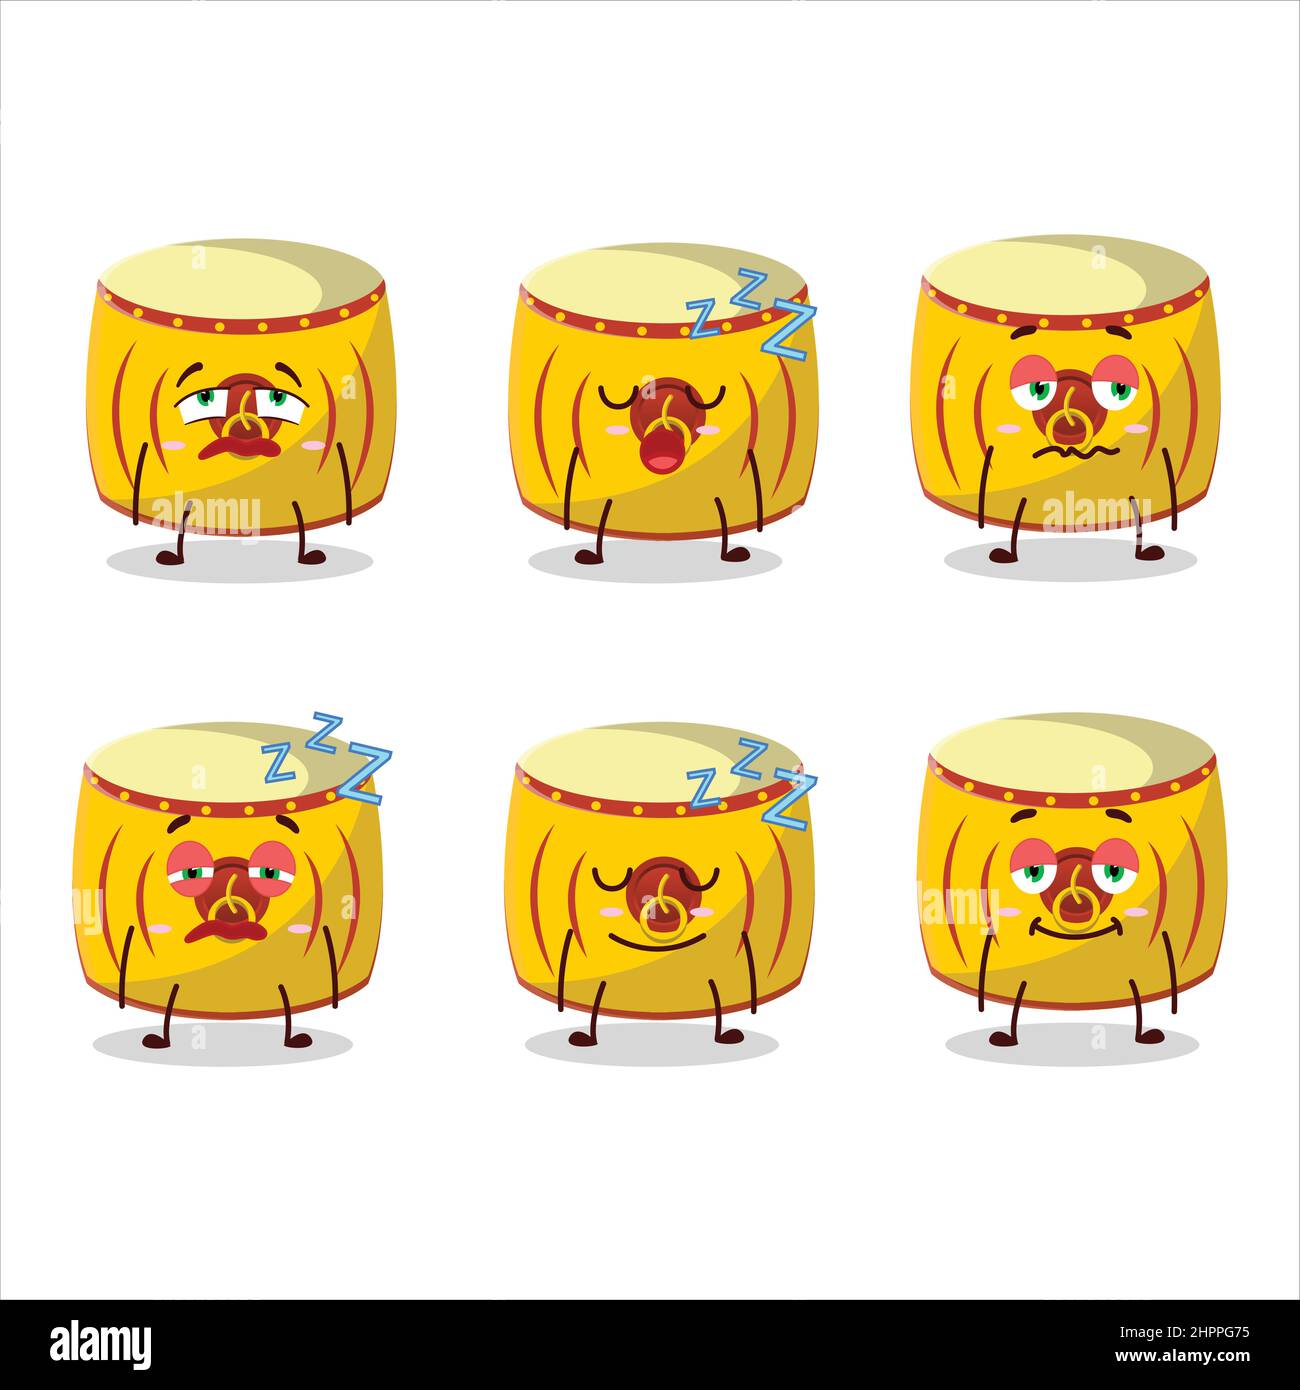 Cartoon Character Of Yellow Chinese Drum With Sleepy Expression Vector Illustration Stock